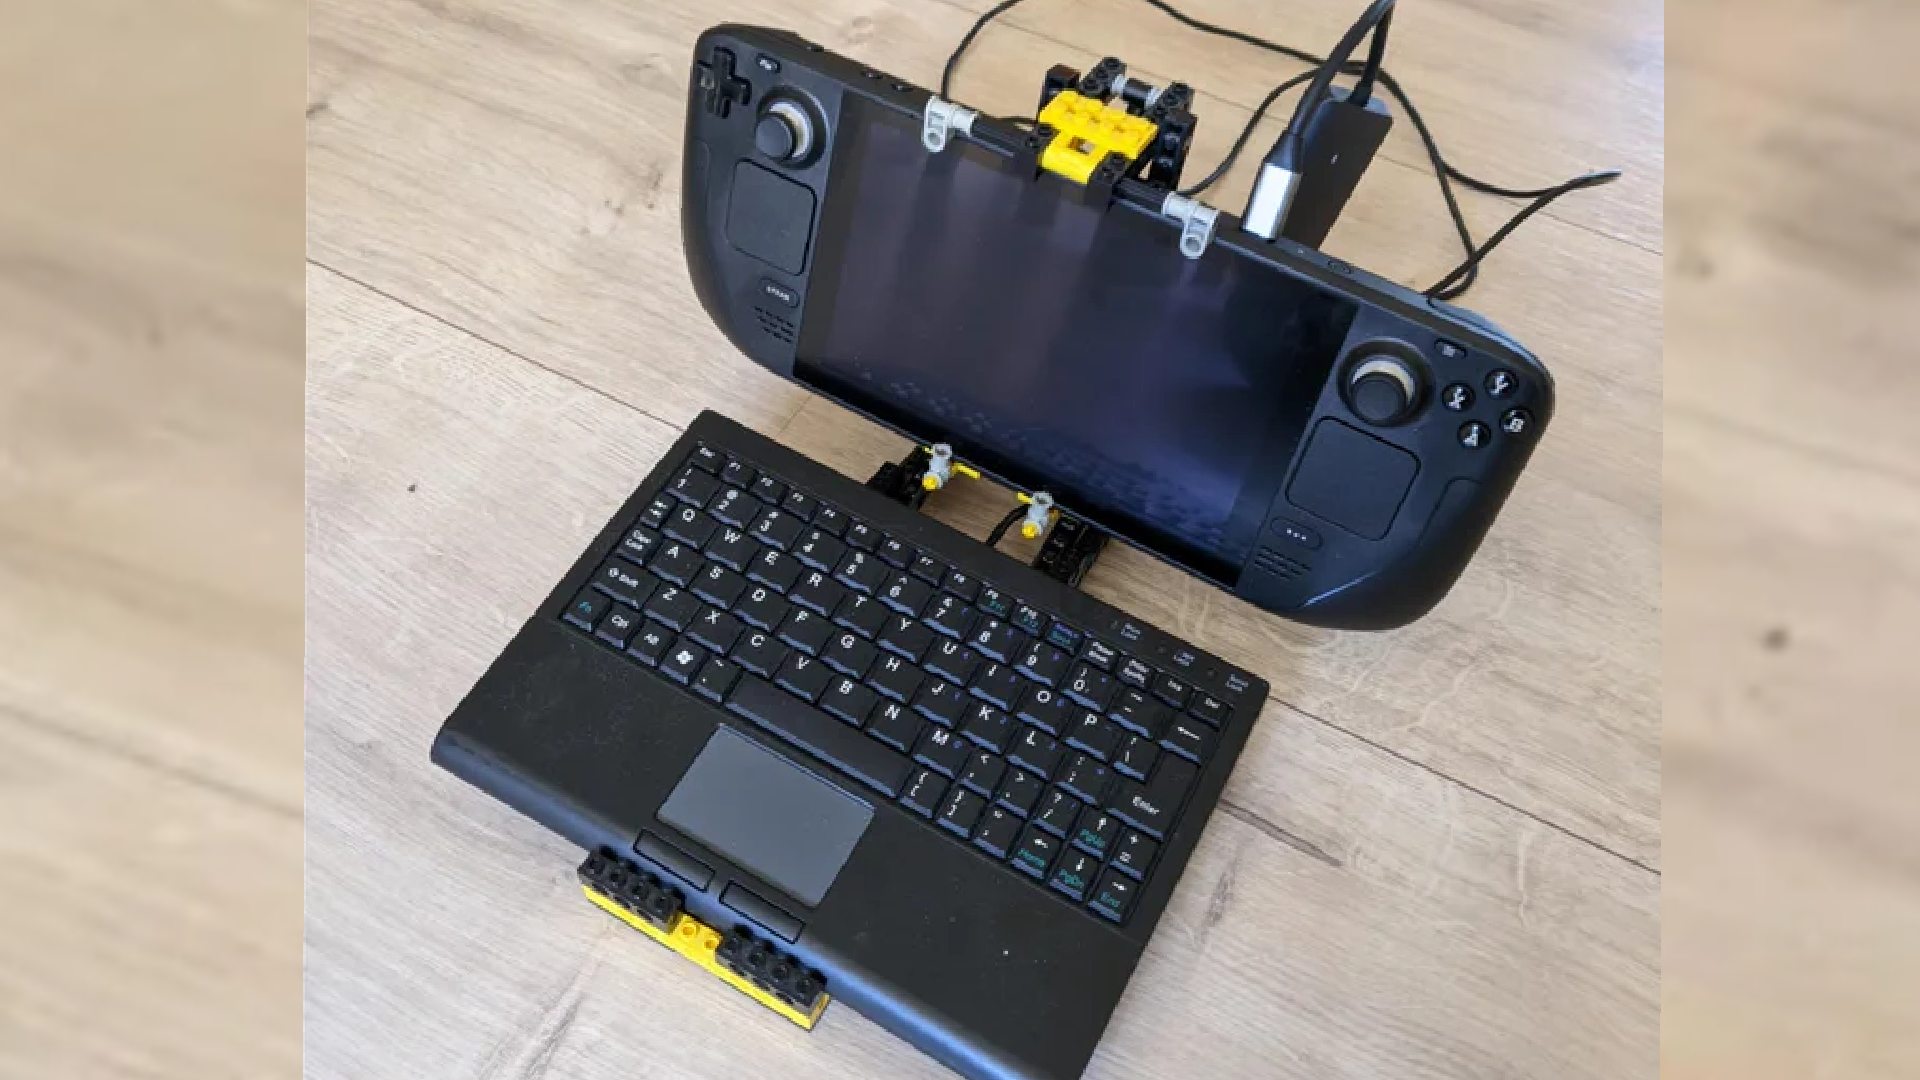 Steam Deck connected to laptop keyboard with Lego stand